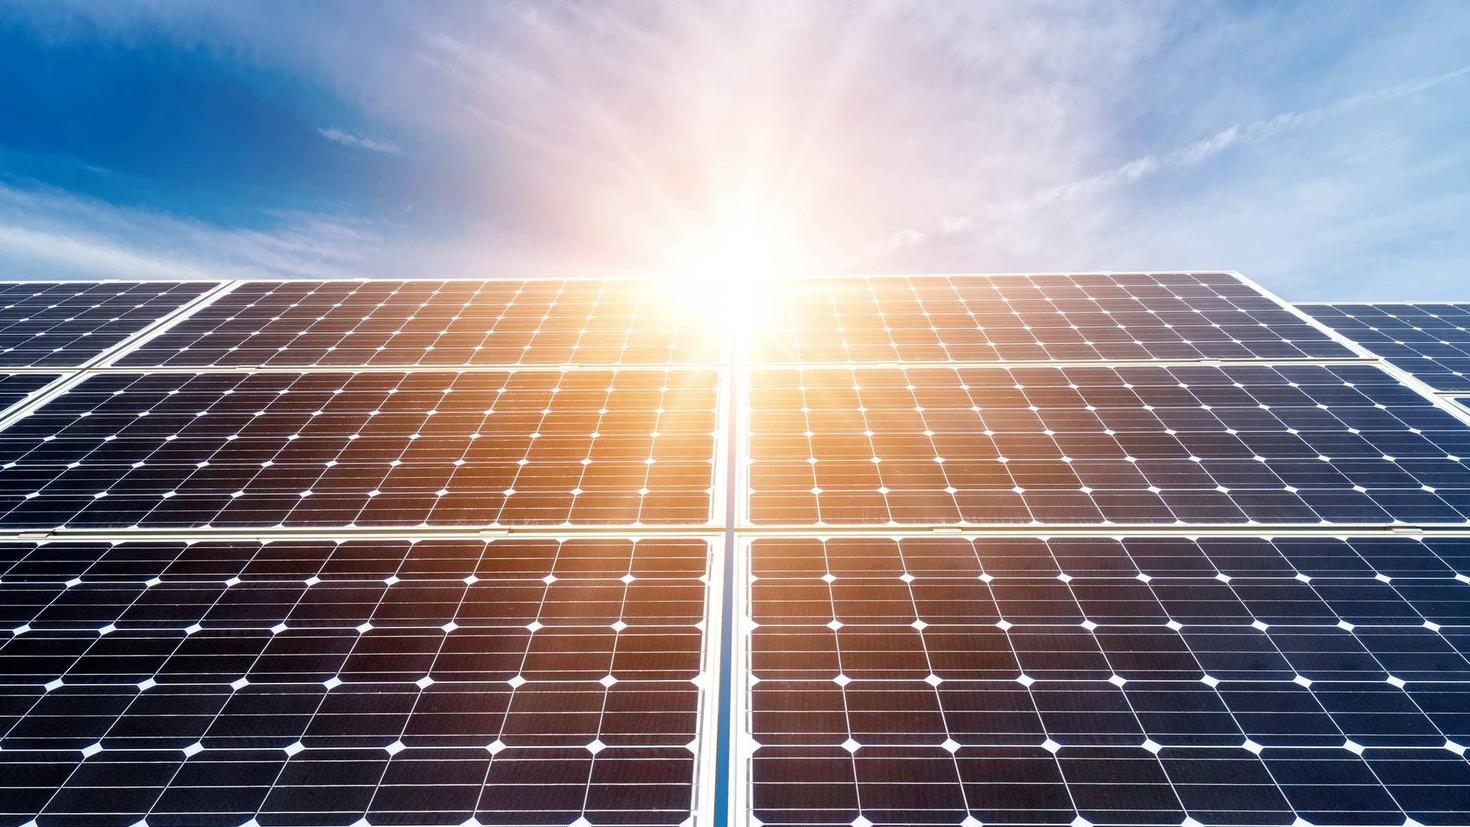 Revolutionary breakthrough in the manufacture of photovoltaic cells at the University of Ottawa 